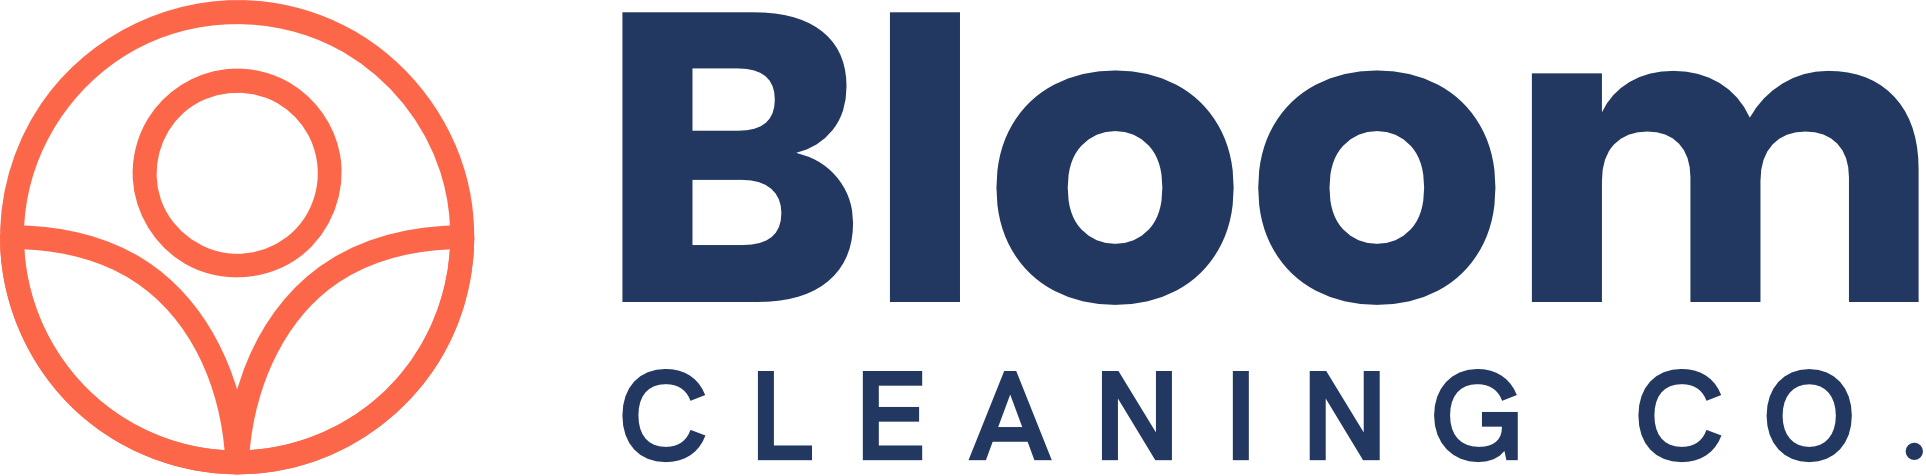 logo for Bloom Cleaning Co.